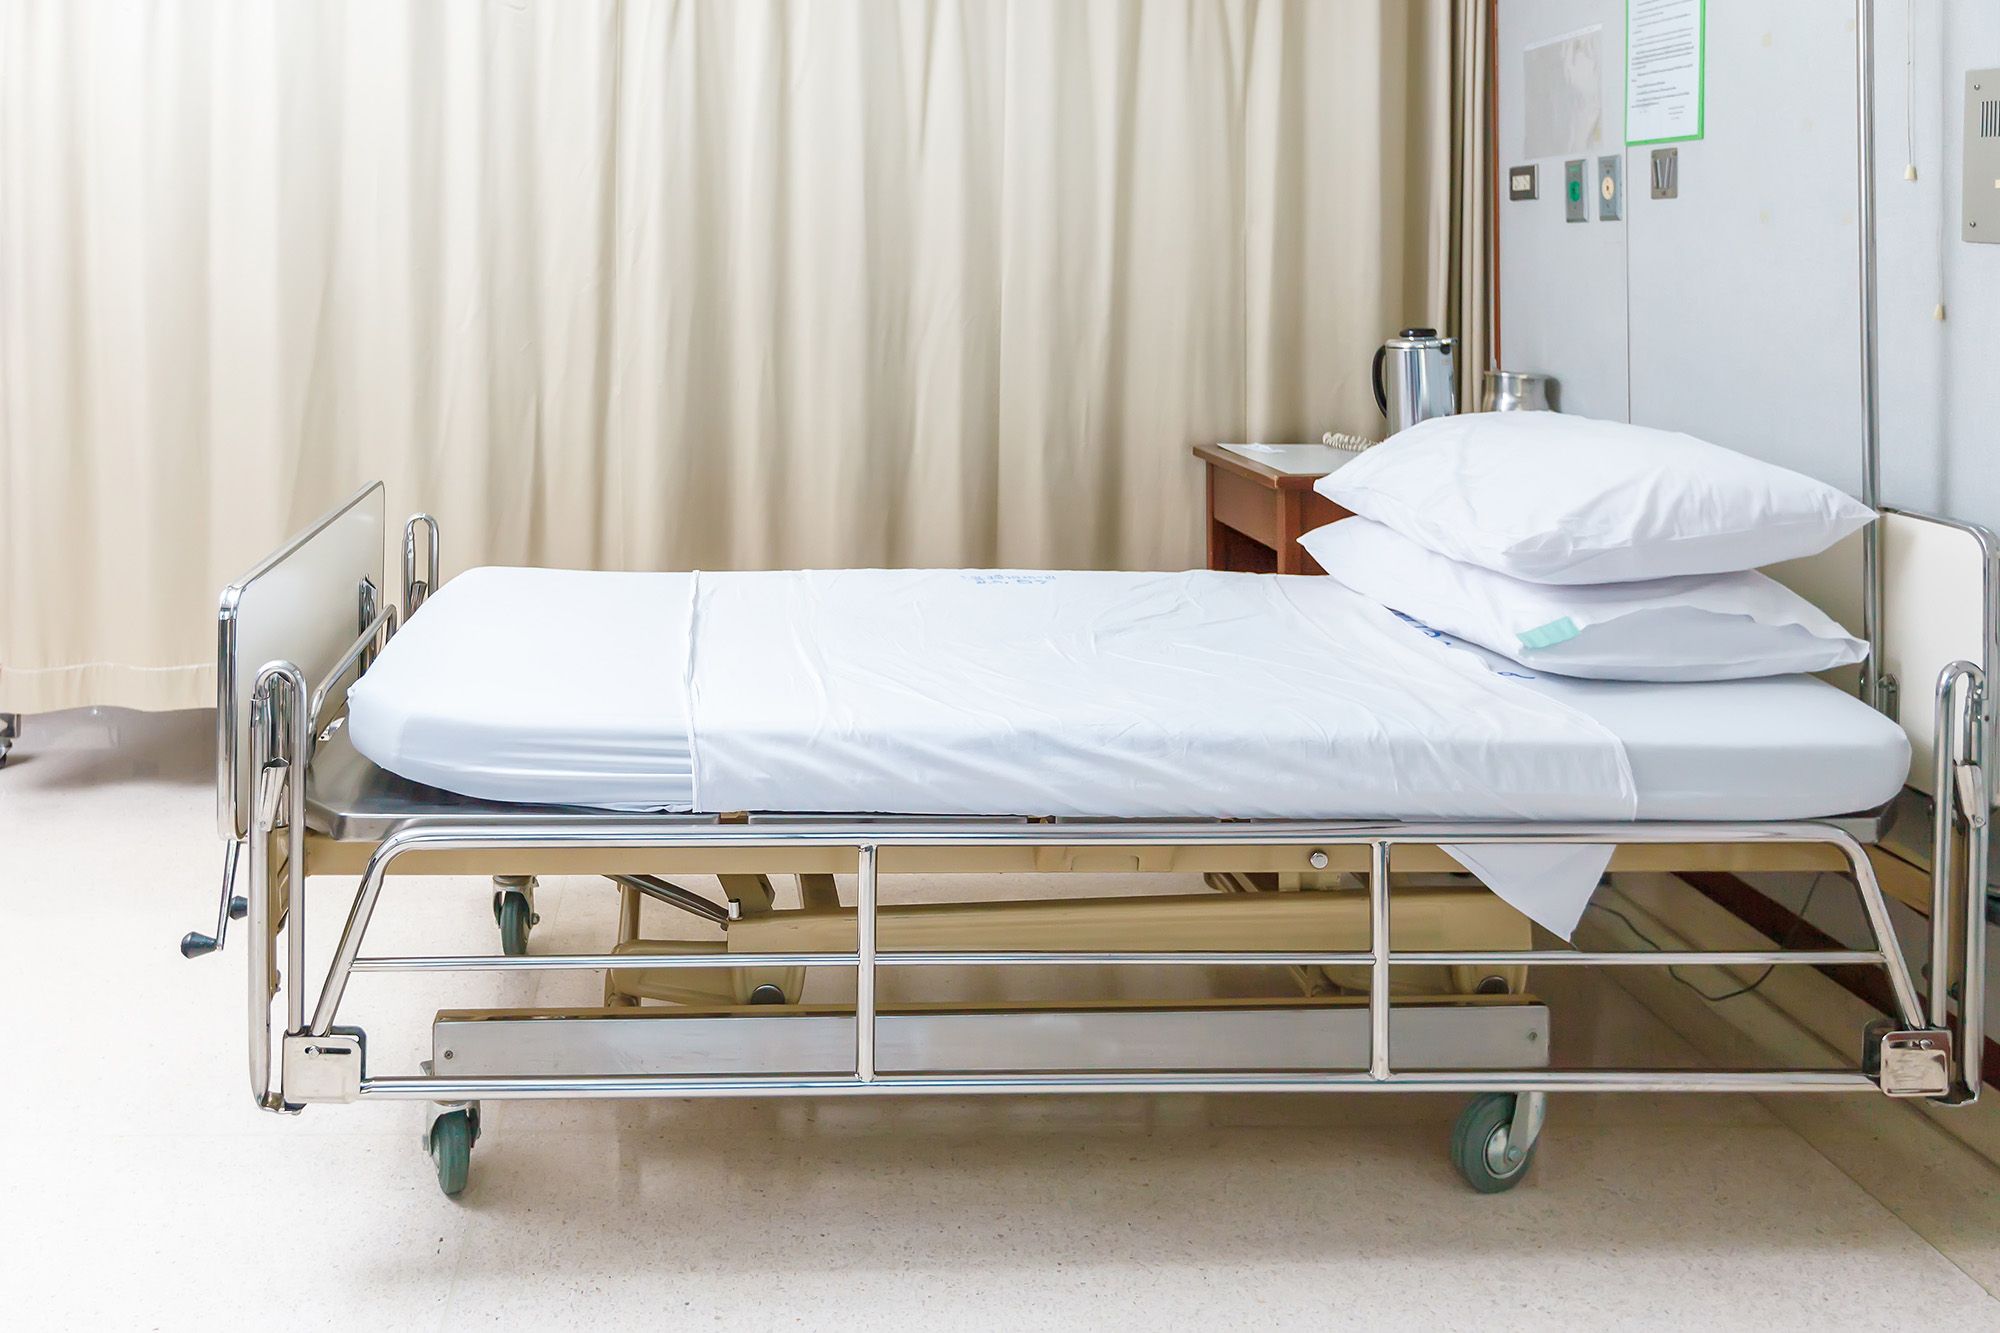 Basic Facts of Hospital Bed Rental Service